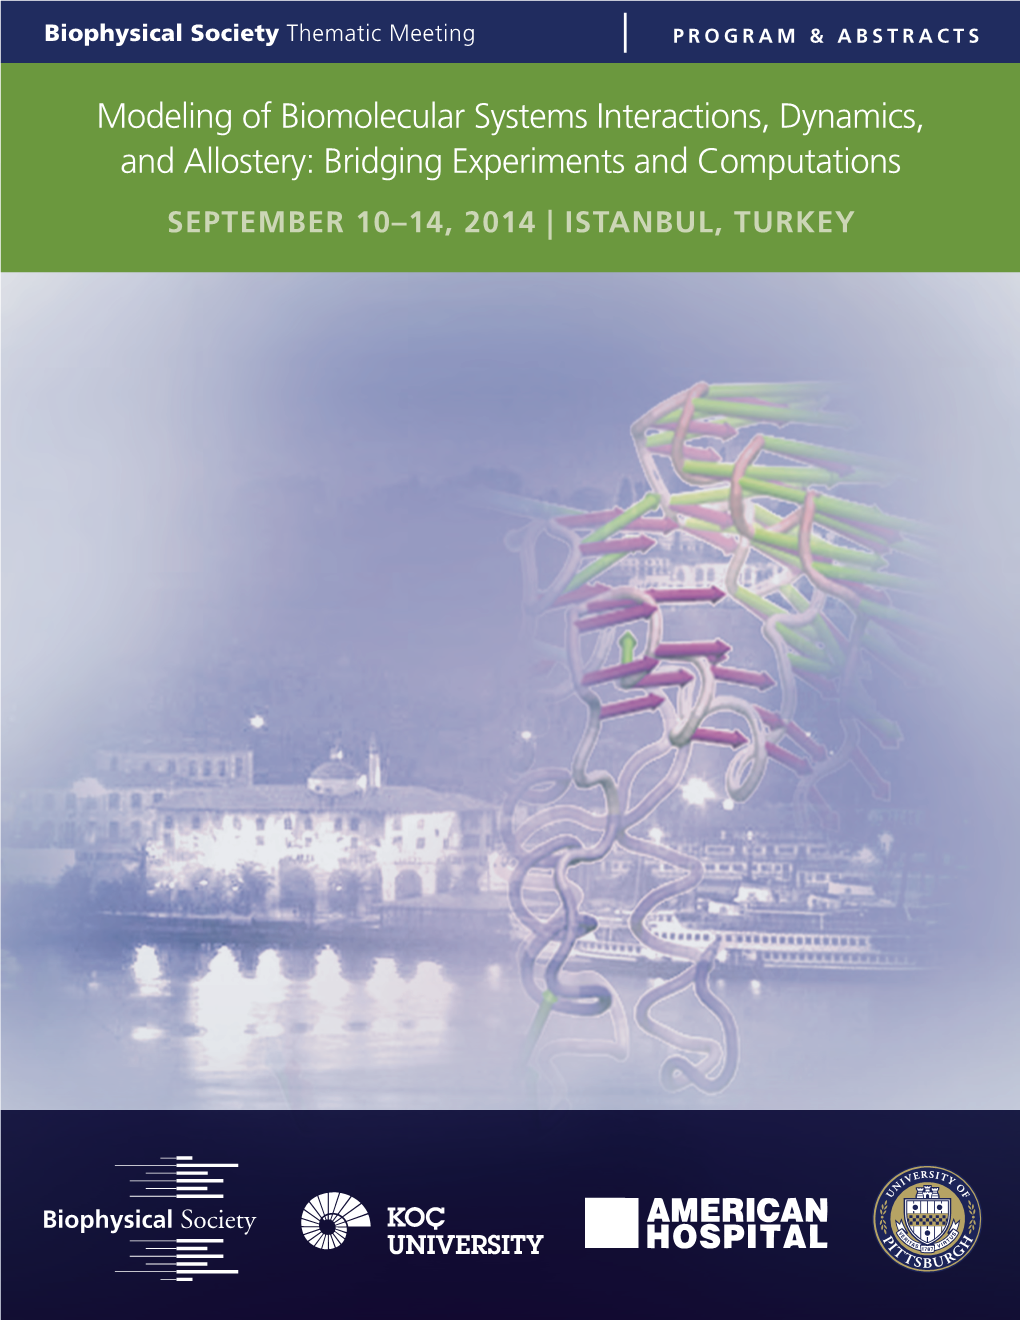 Modeling of Biomolecular Systems Interactions, Dynamics, and Allostery: Bridging Experiments and Computations SEPTEMBER 10–14, 2014 | ISTANBUL, TURKEY